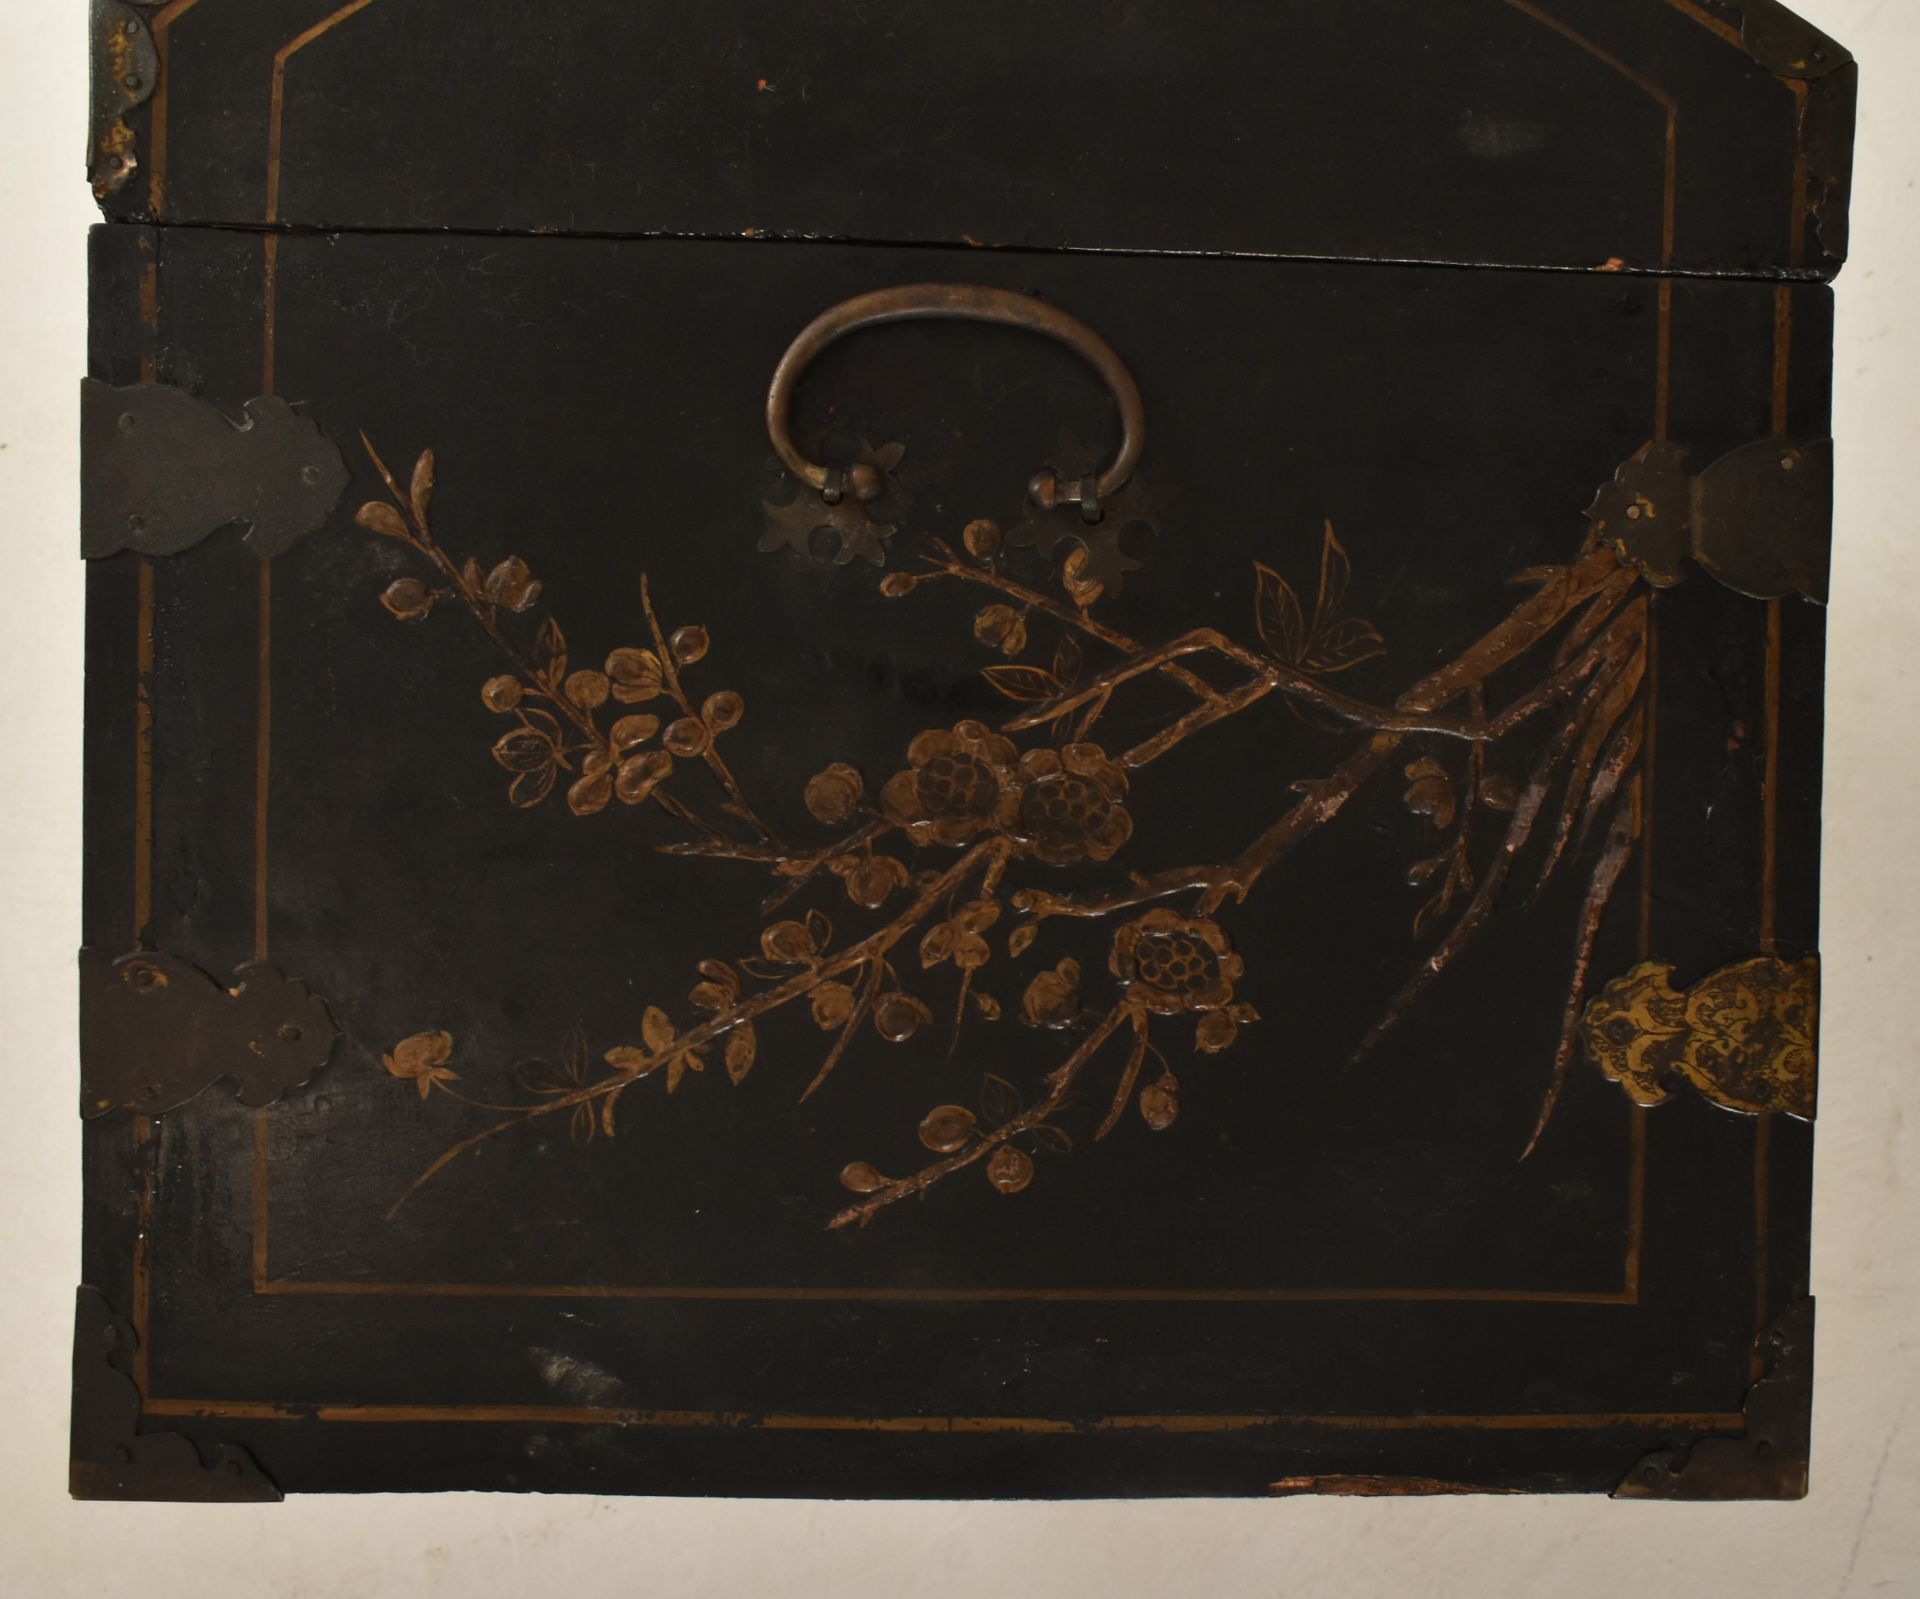 QING DYNASTY WOODEN LACQUERED STORAGE CHEST 清 富贵木宝箱 - Image 5 of 10